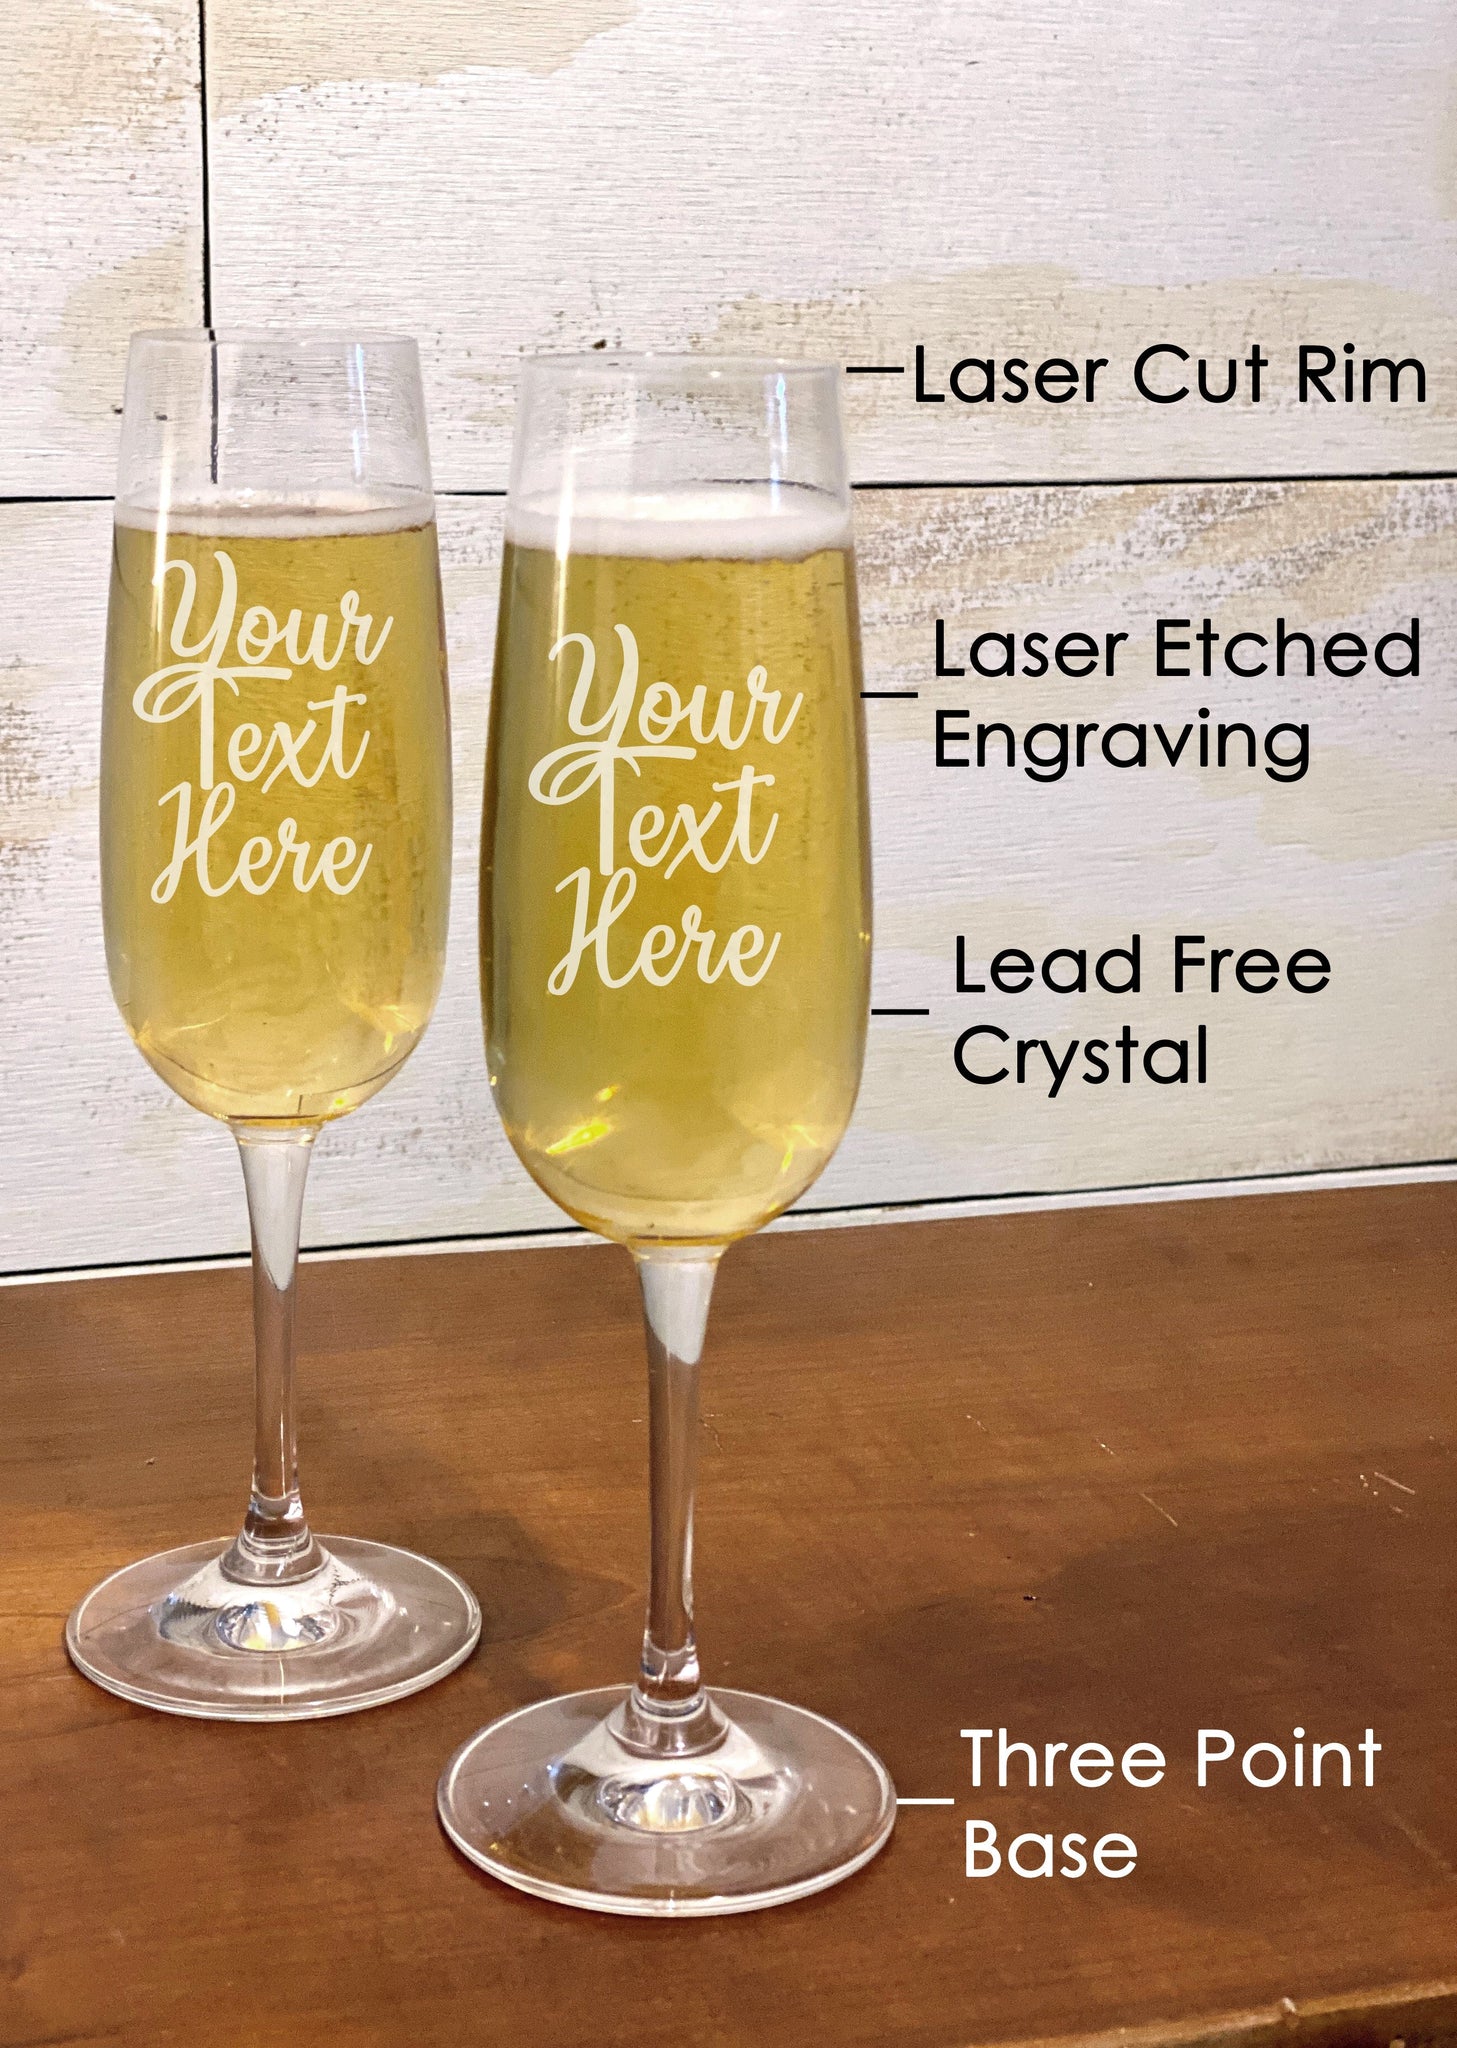 Personalized Anniversary Champagne Flutes - Set of 2